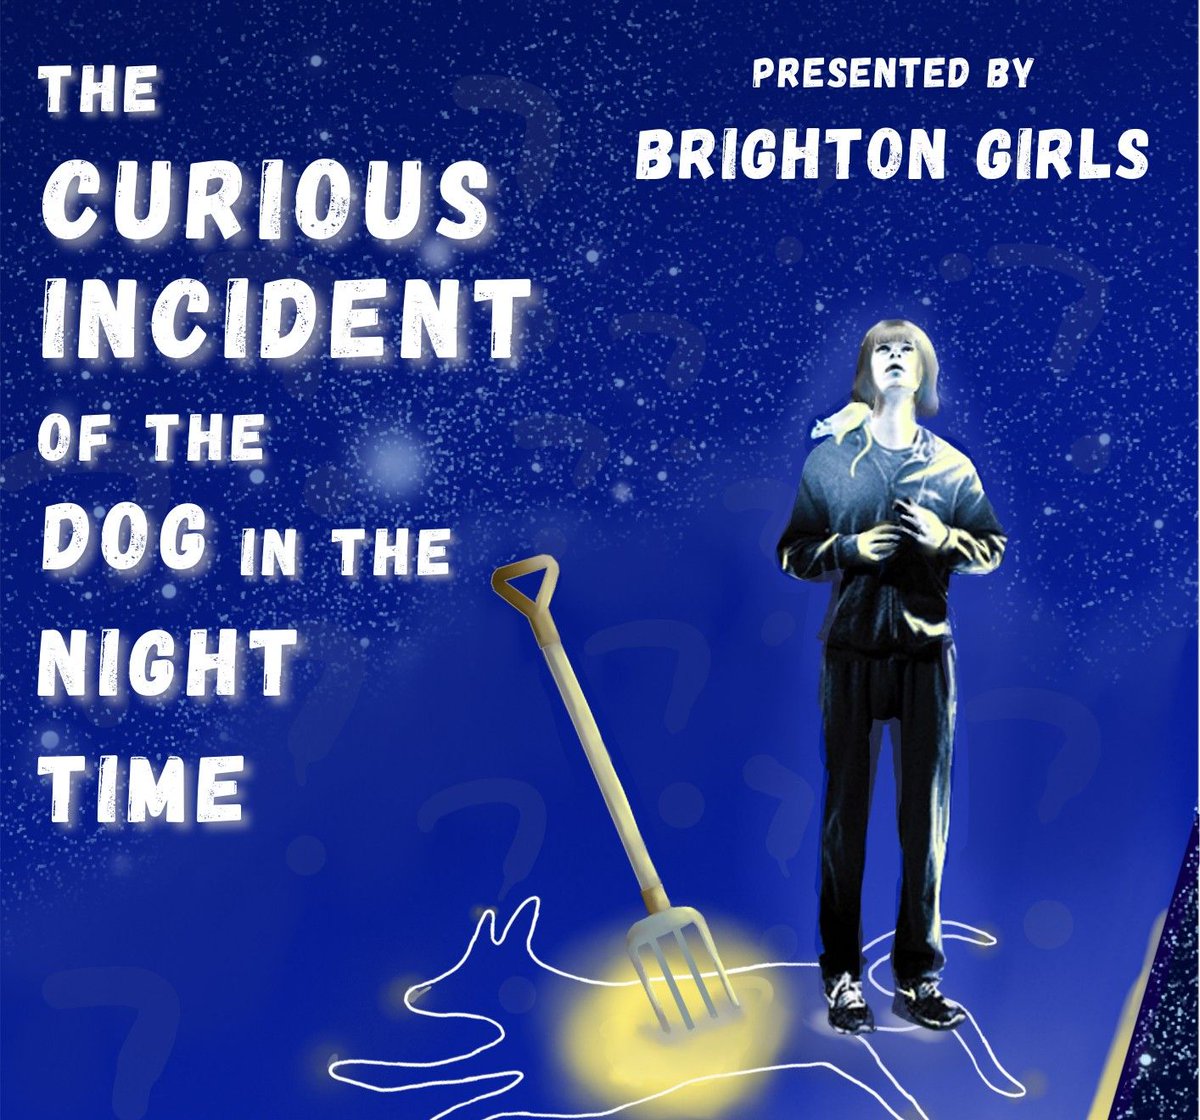 🎭 The final countdown is on! ✨️

'The Curious Incident of the Dog in the Night Time' opens in just a few days. Have you got your tickets yet? 

shorturl.at/efnM6

#CuriousIncidentOfTheDogInTheNightTime #BoldandKind #GDST #SchoolProduction #FinalCountdown #GetYourTickets